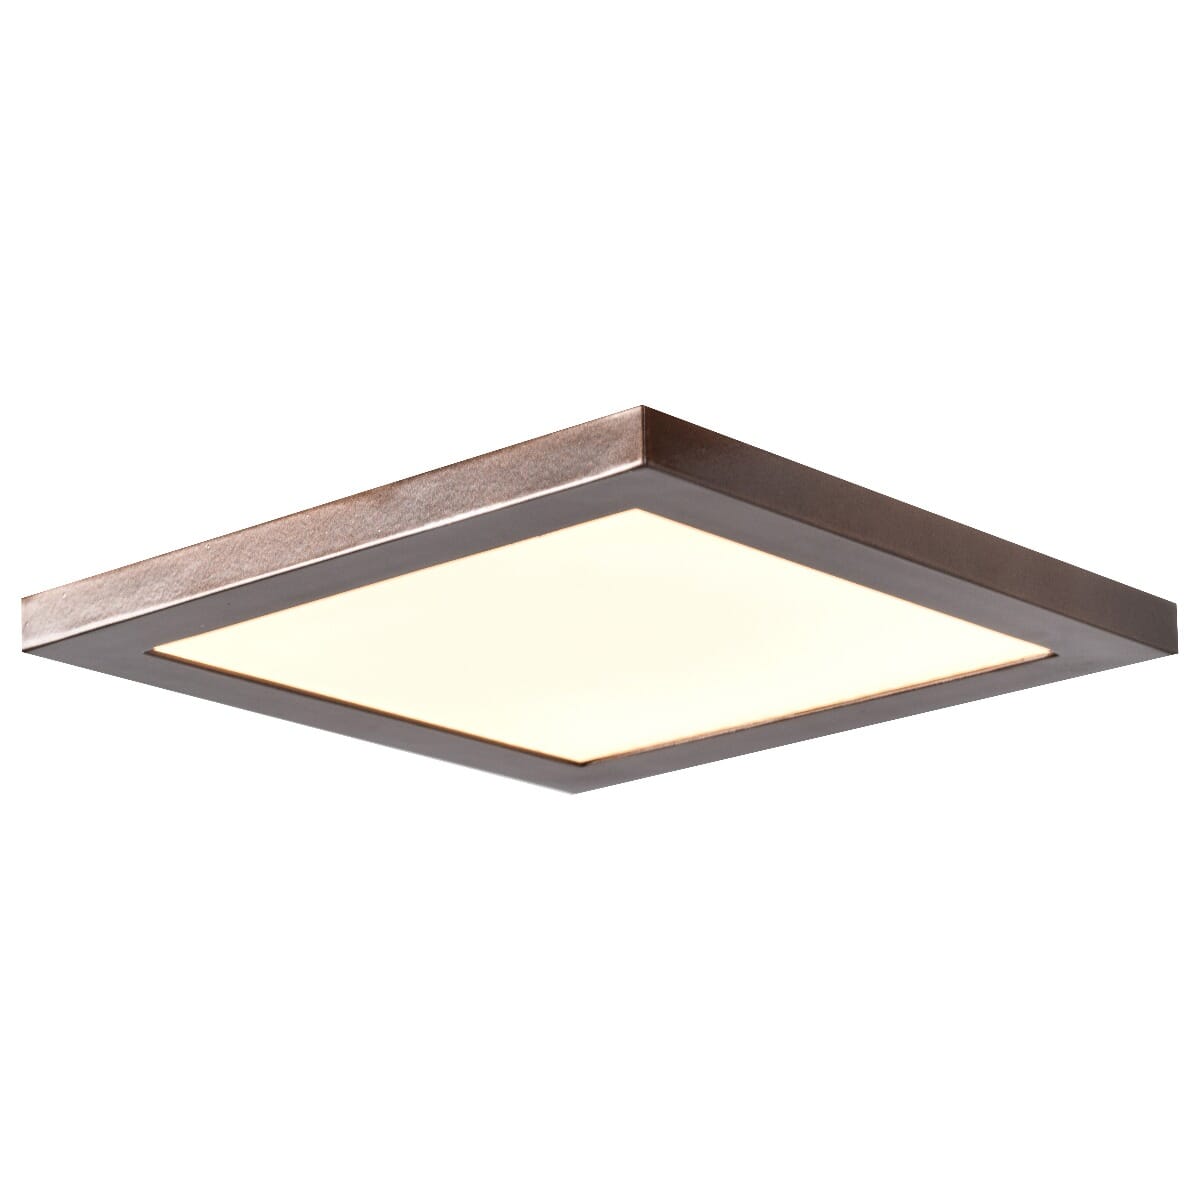 Access Boxer 10" Ceiling Light in Brushed Steel